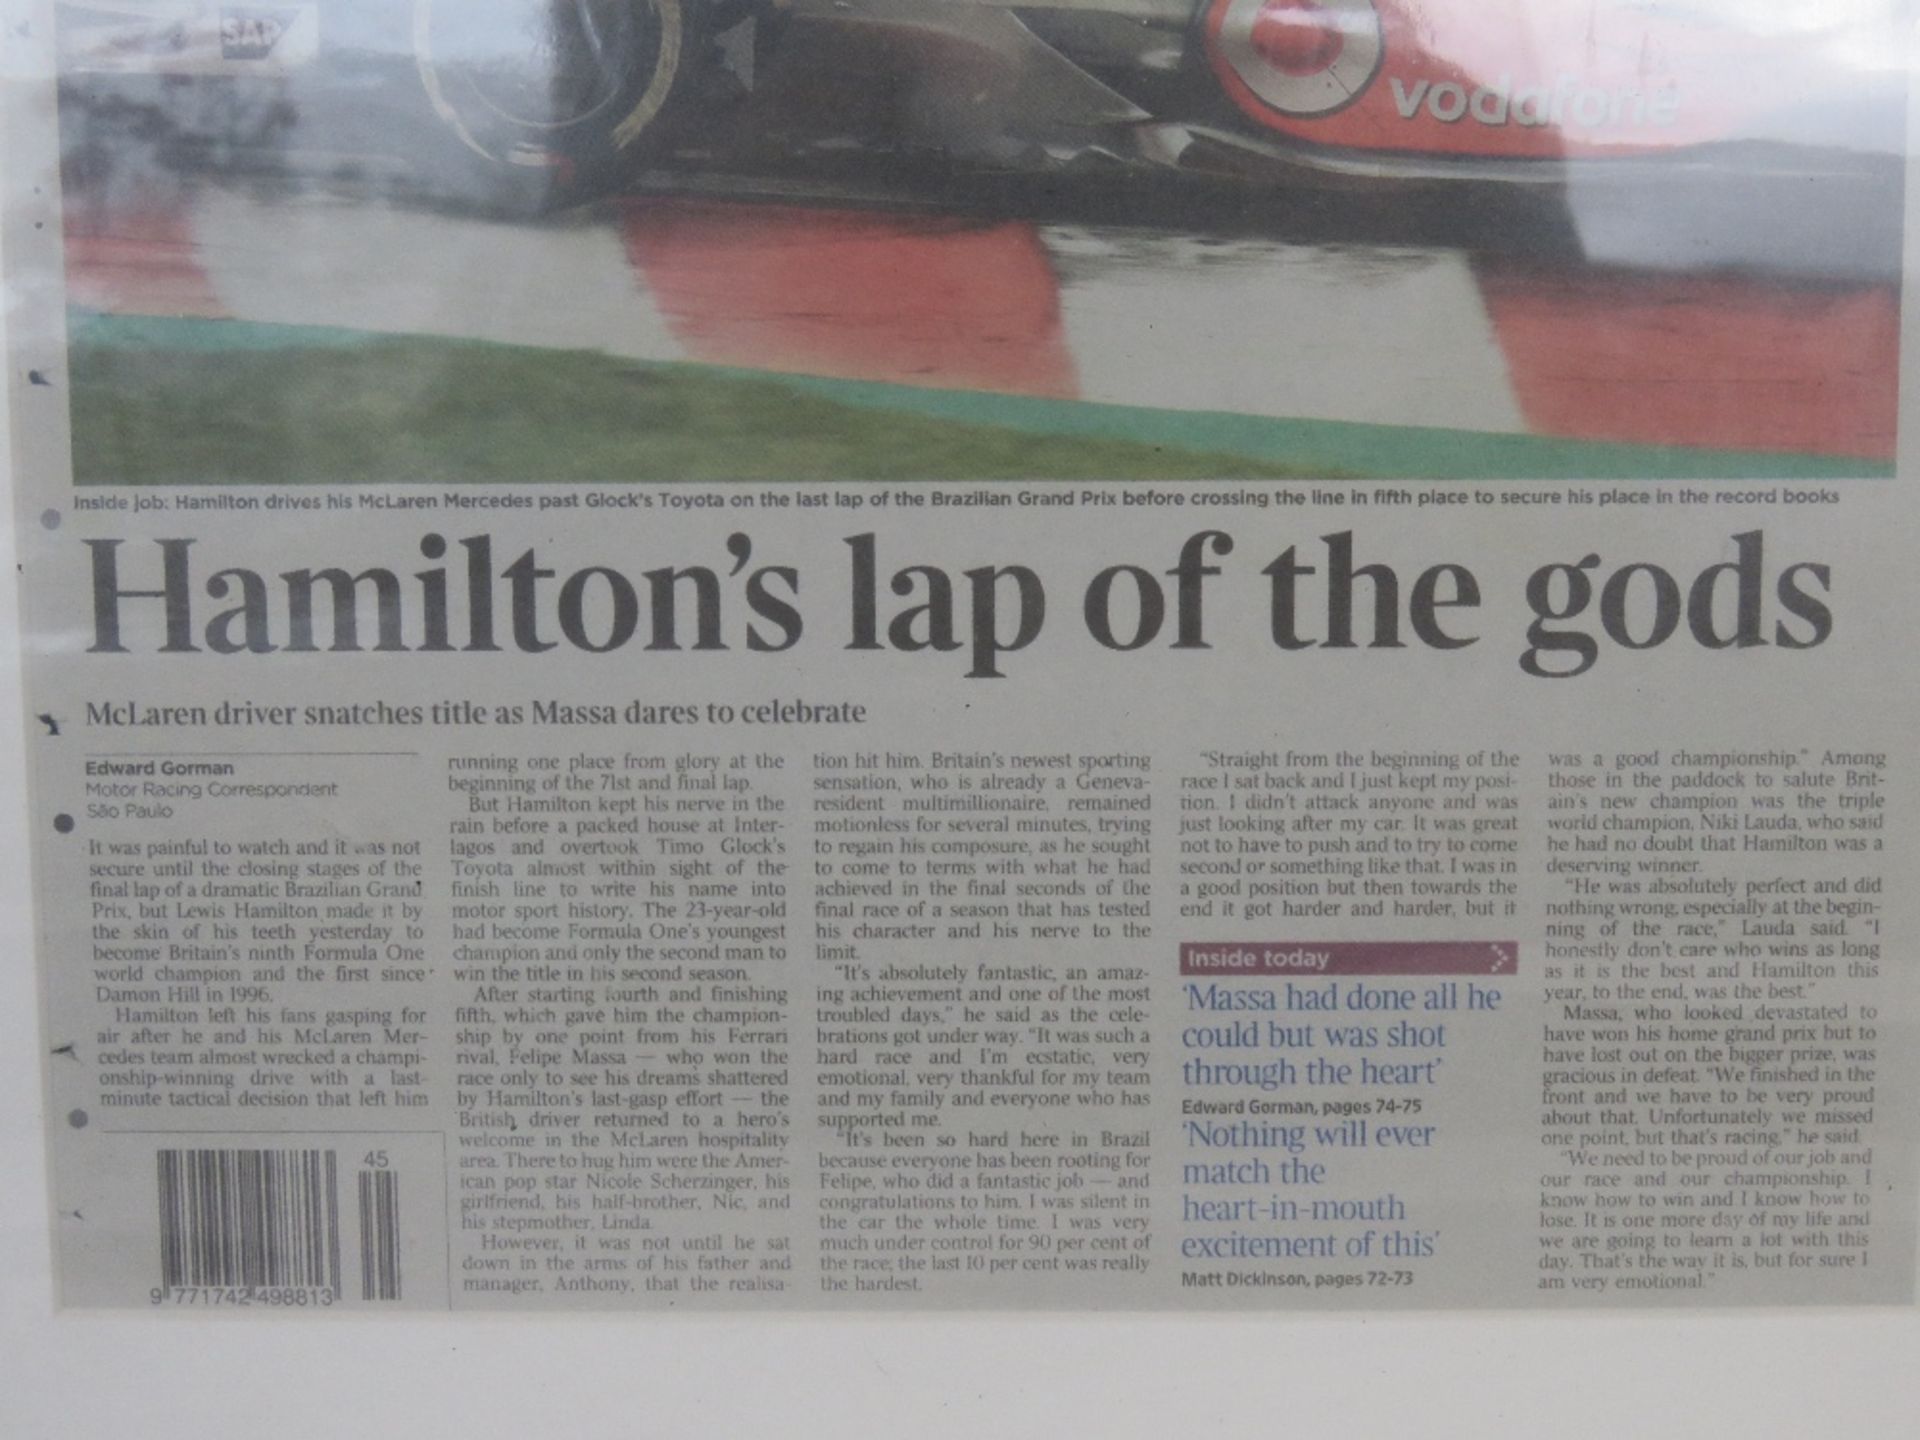 A framed F1 themed newspaper article 'Hamiltons lap of the gods'. - Image 2 of 2